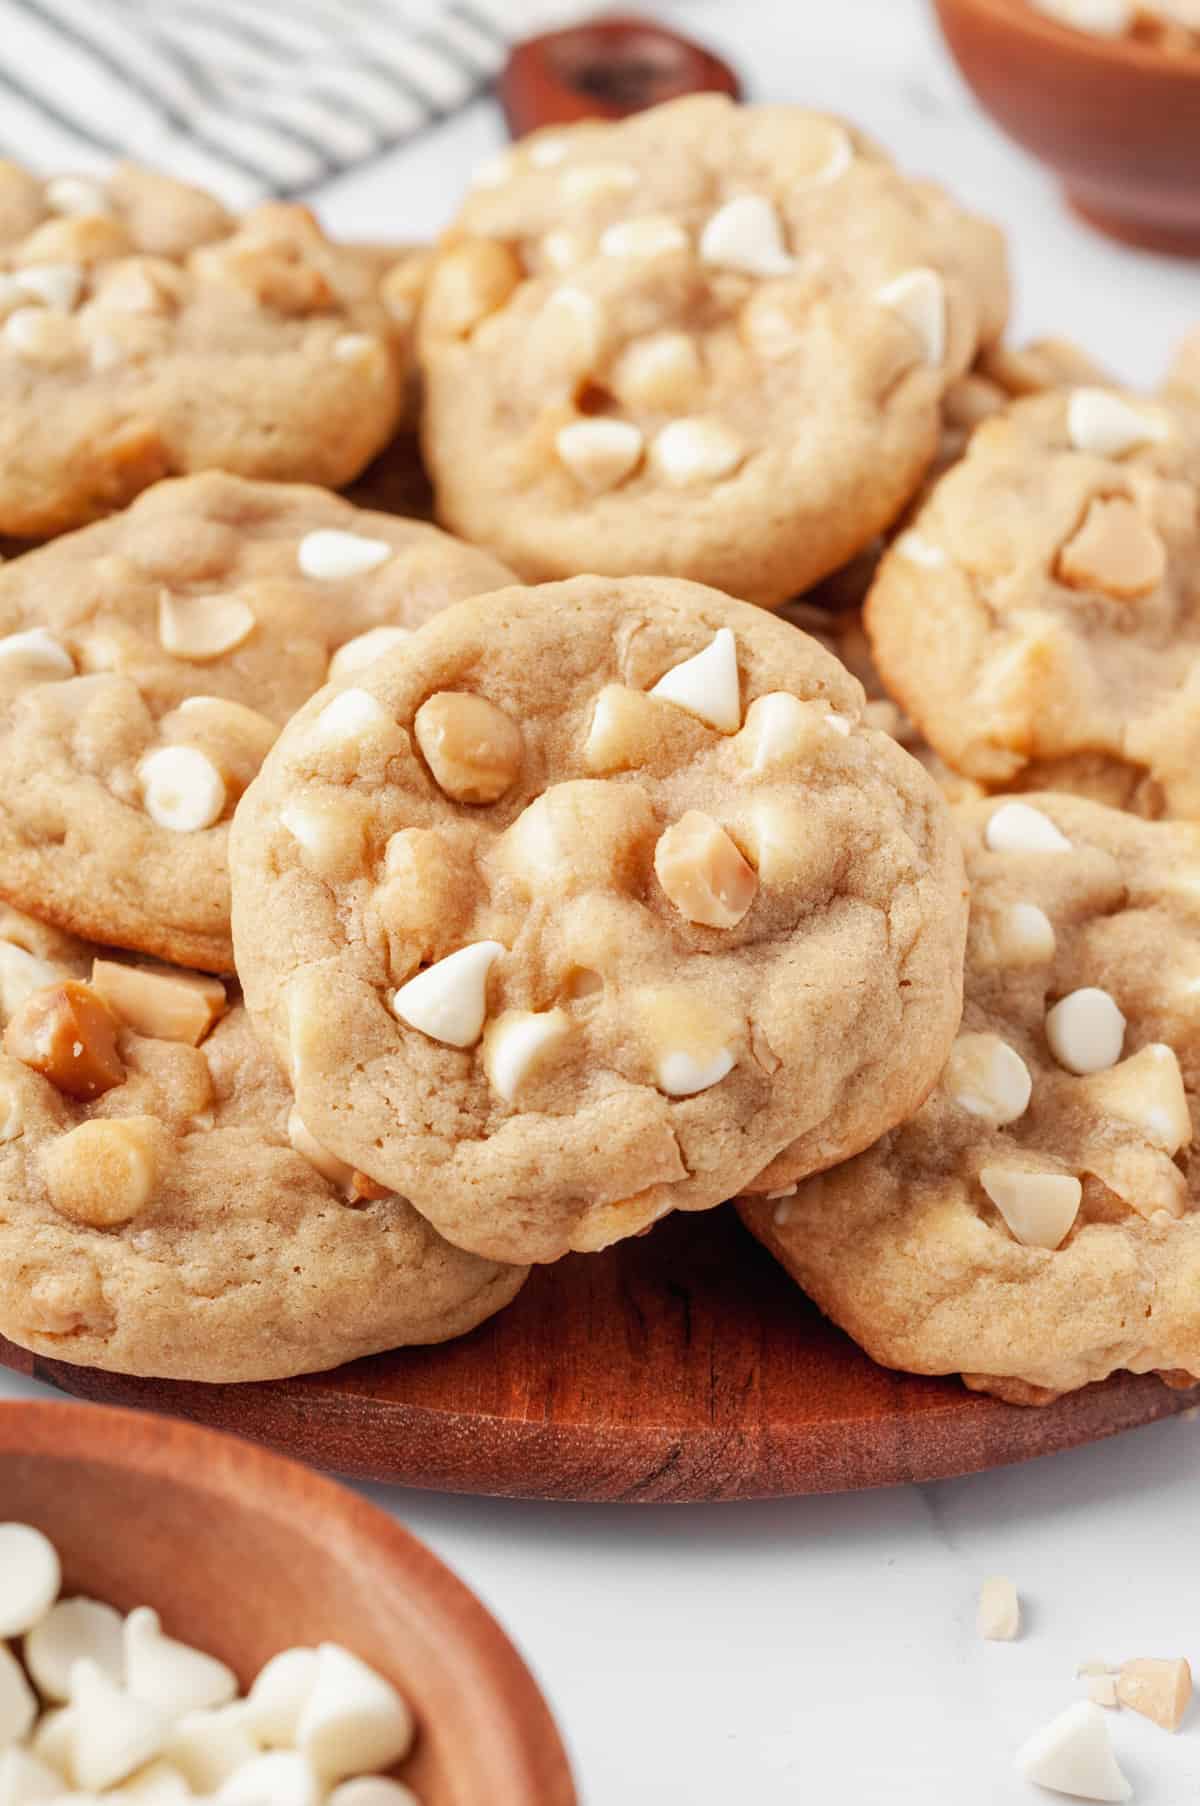 close up image of a pile of macadamia nut cookies served on a round wooden board.